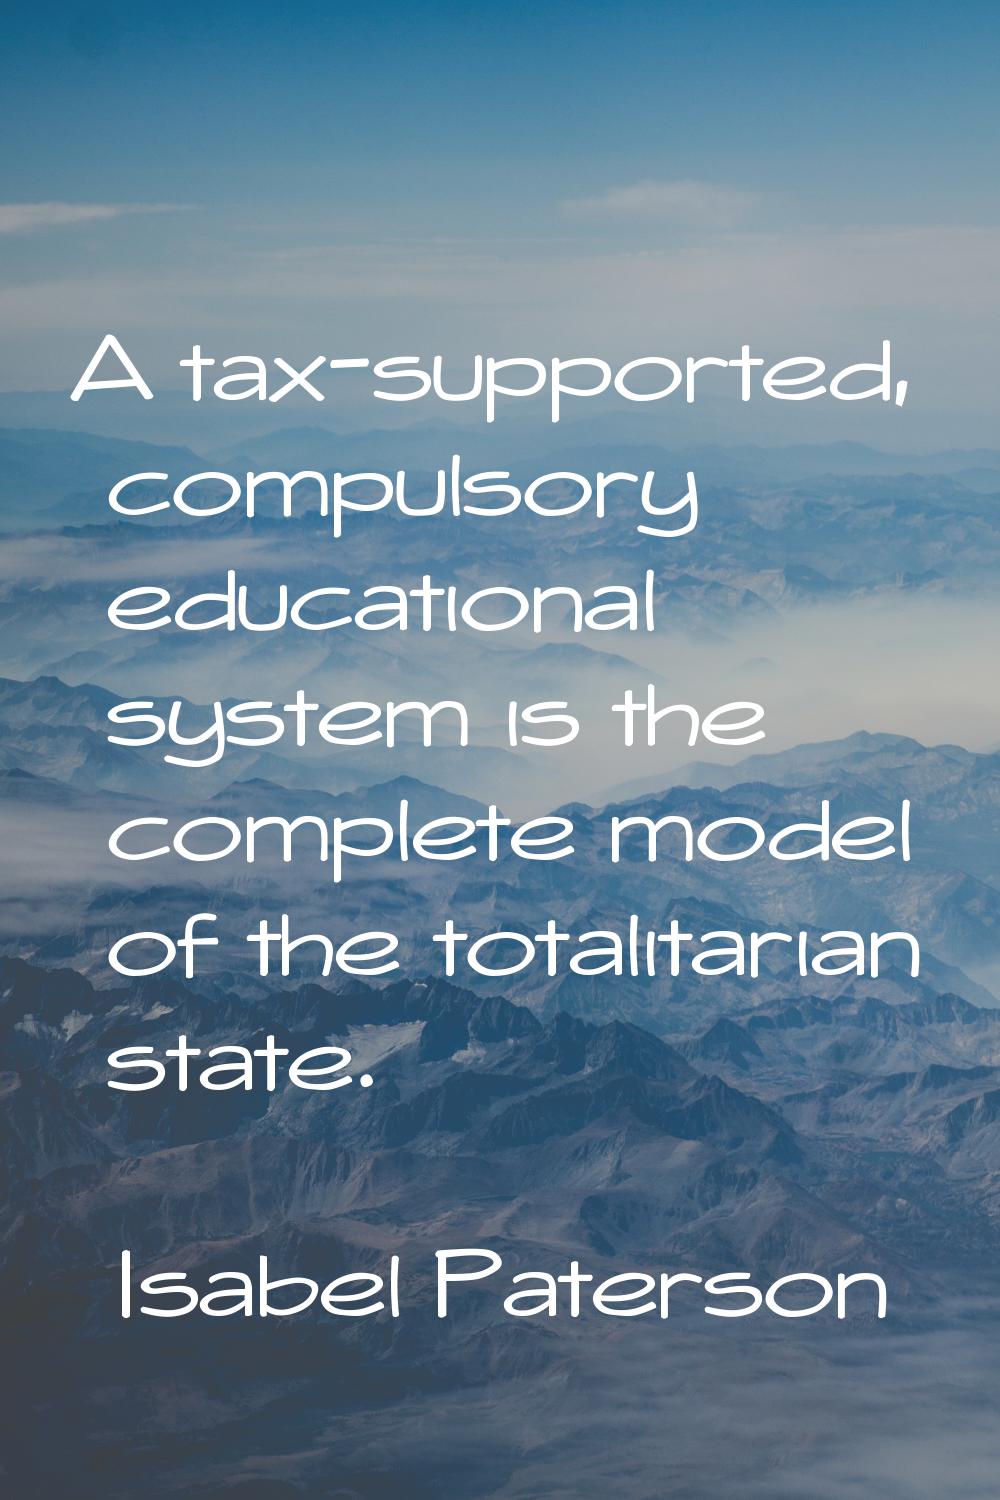 A tax-supported, compulsory educational system is the complete model of the totalitarian state.